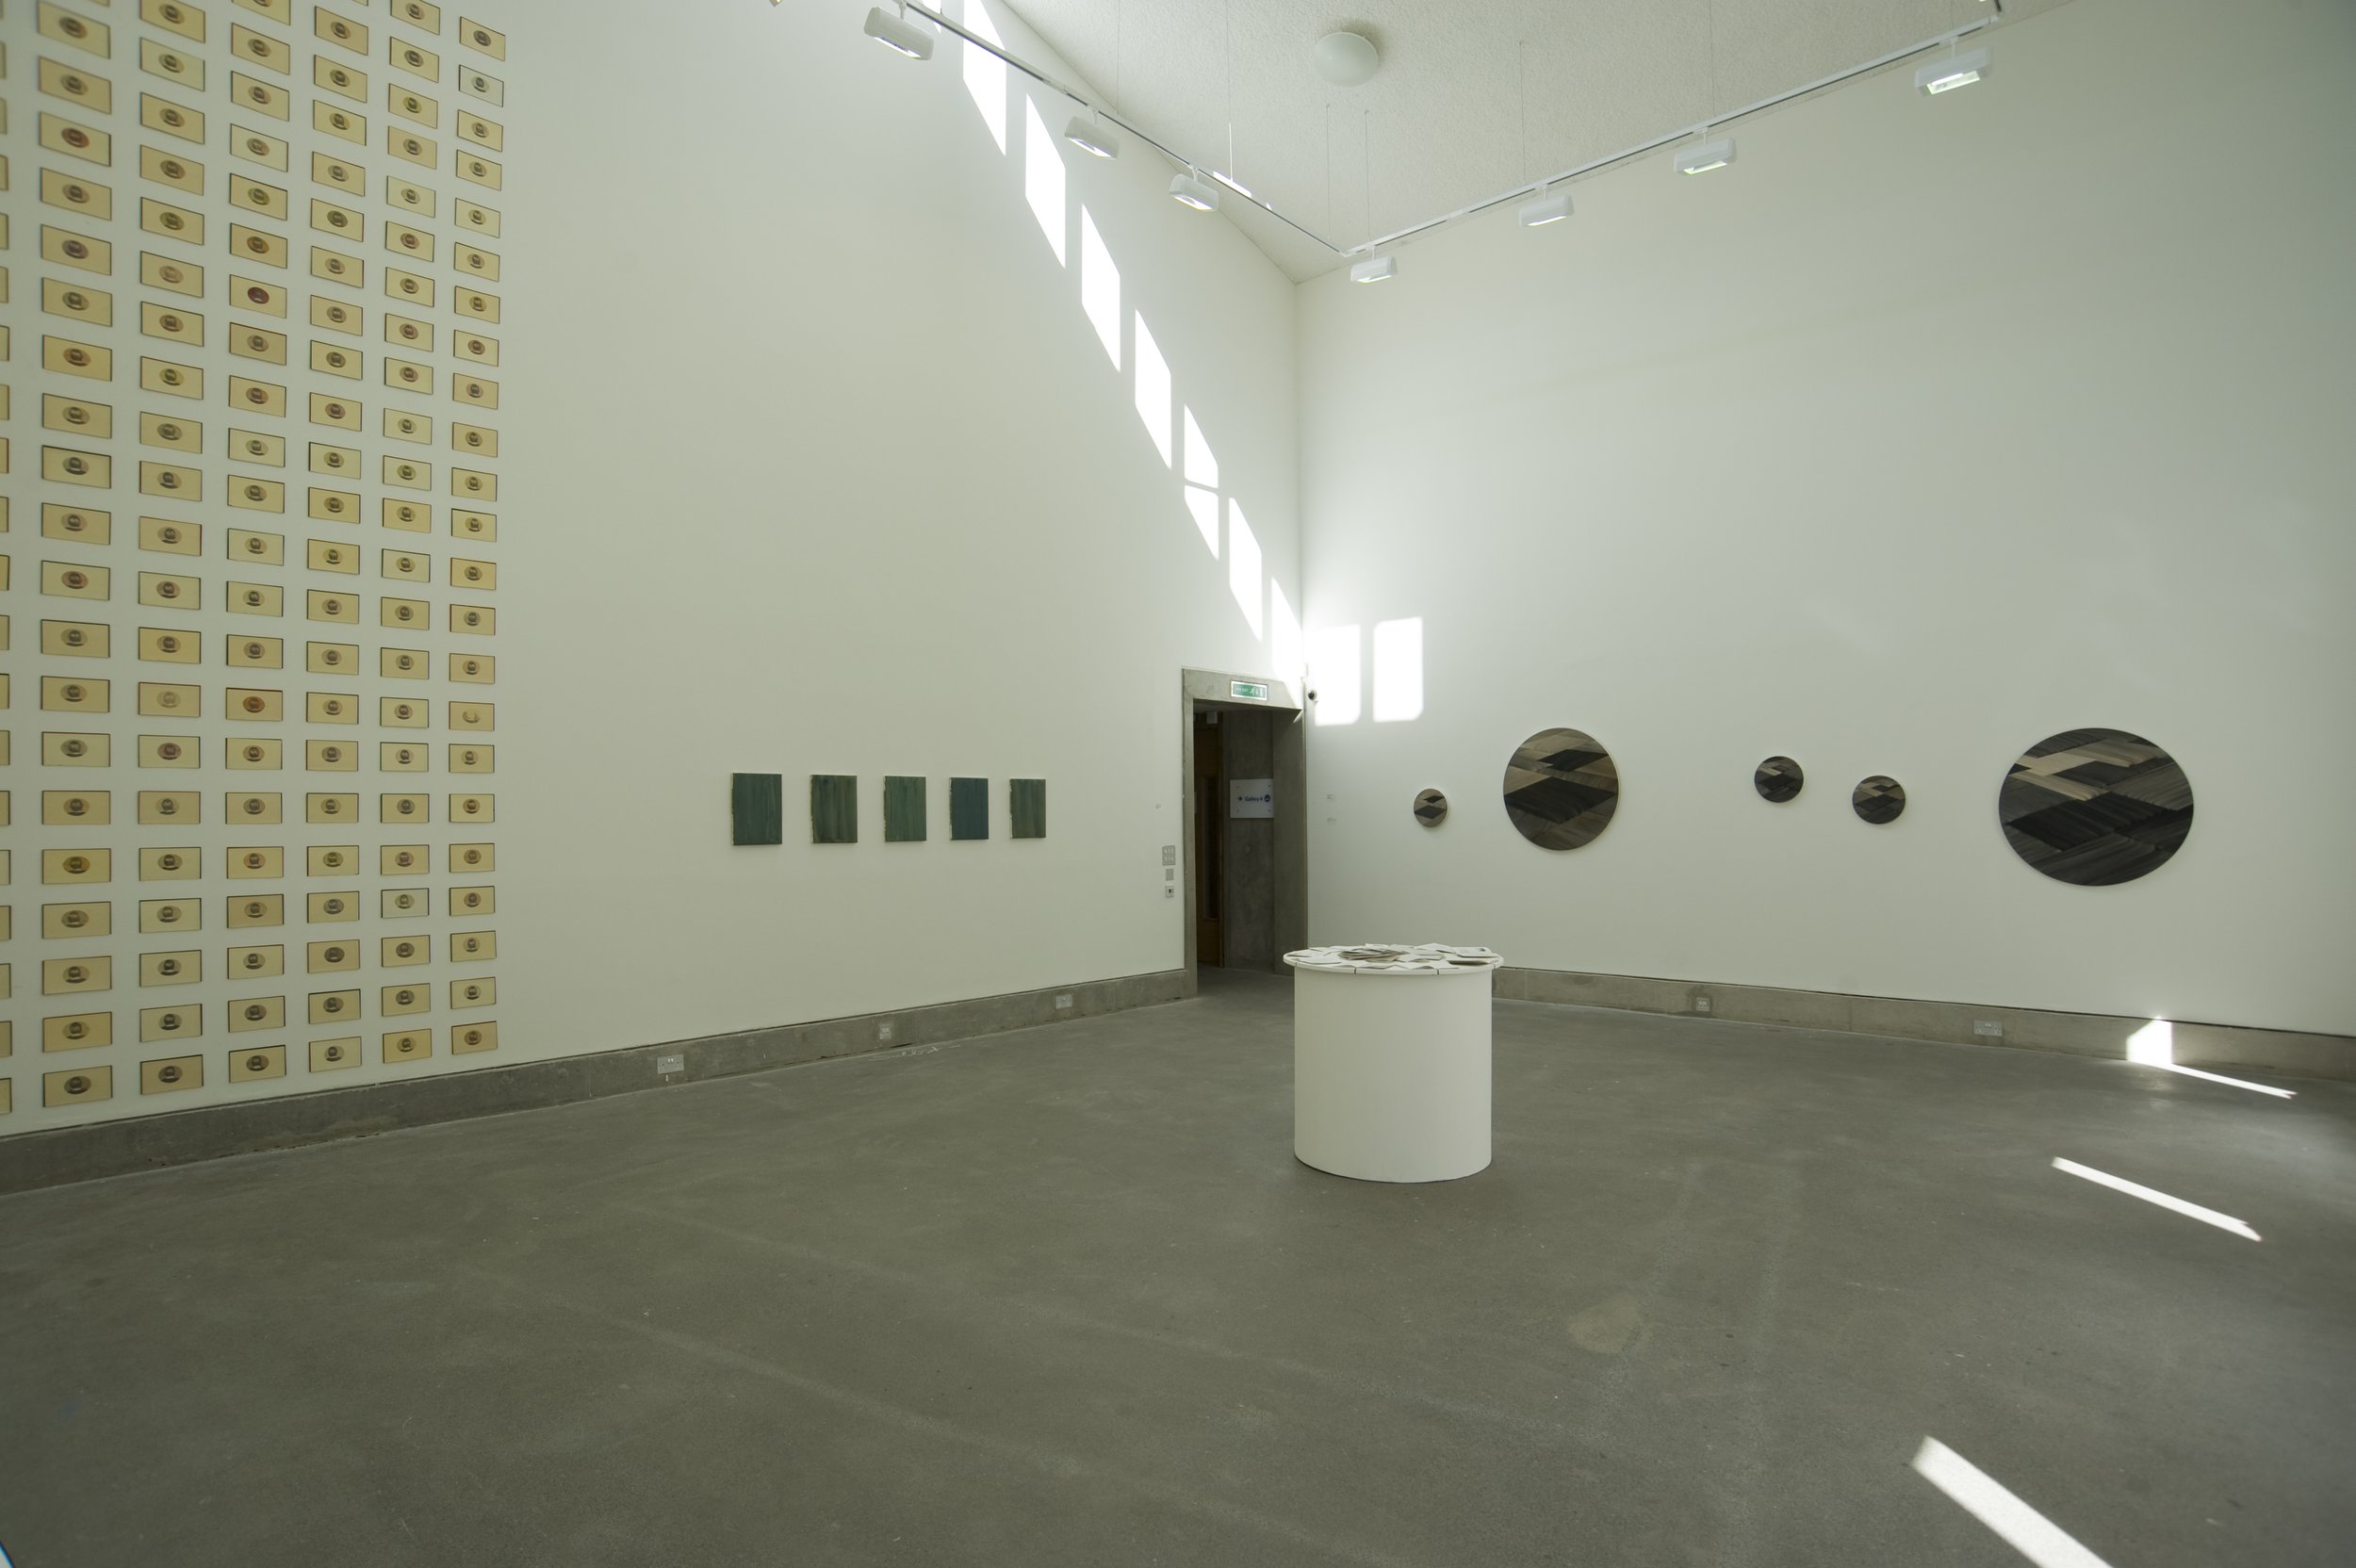  Image of the gallery showing James Quin’s  installation, Henry Tietzch-Tyler paintings, and on the far wall, M. B. O’Toole’s circular paintings. At the centre of the gallery floor a circular plinth displaying Christine Arnold’s book. 